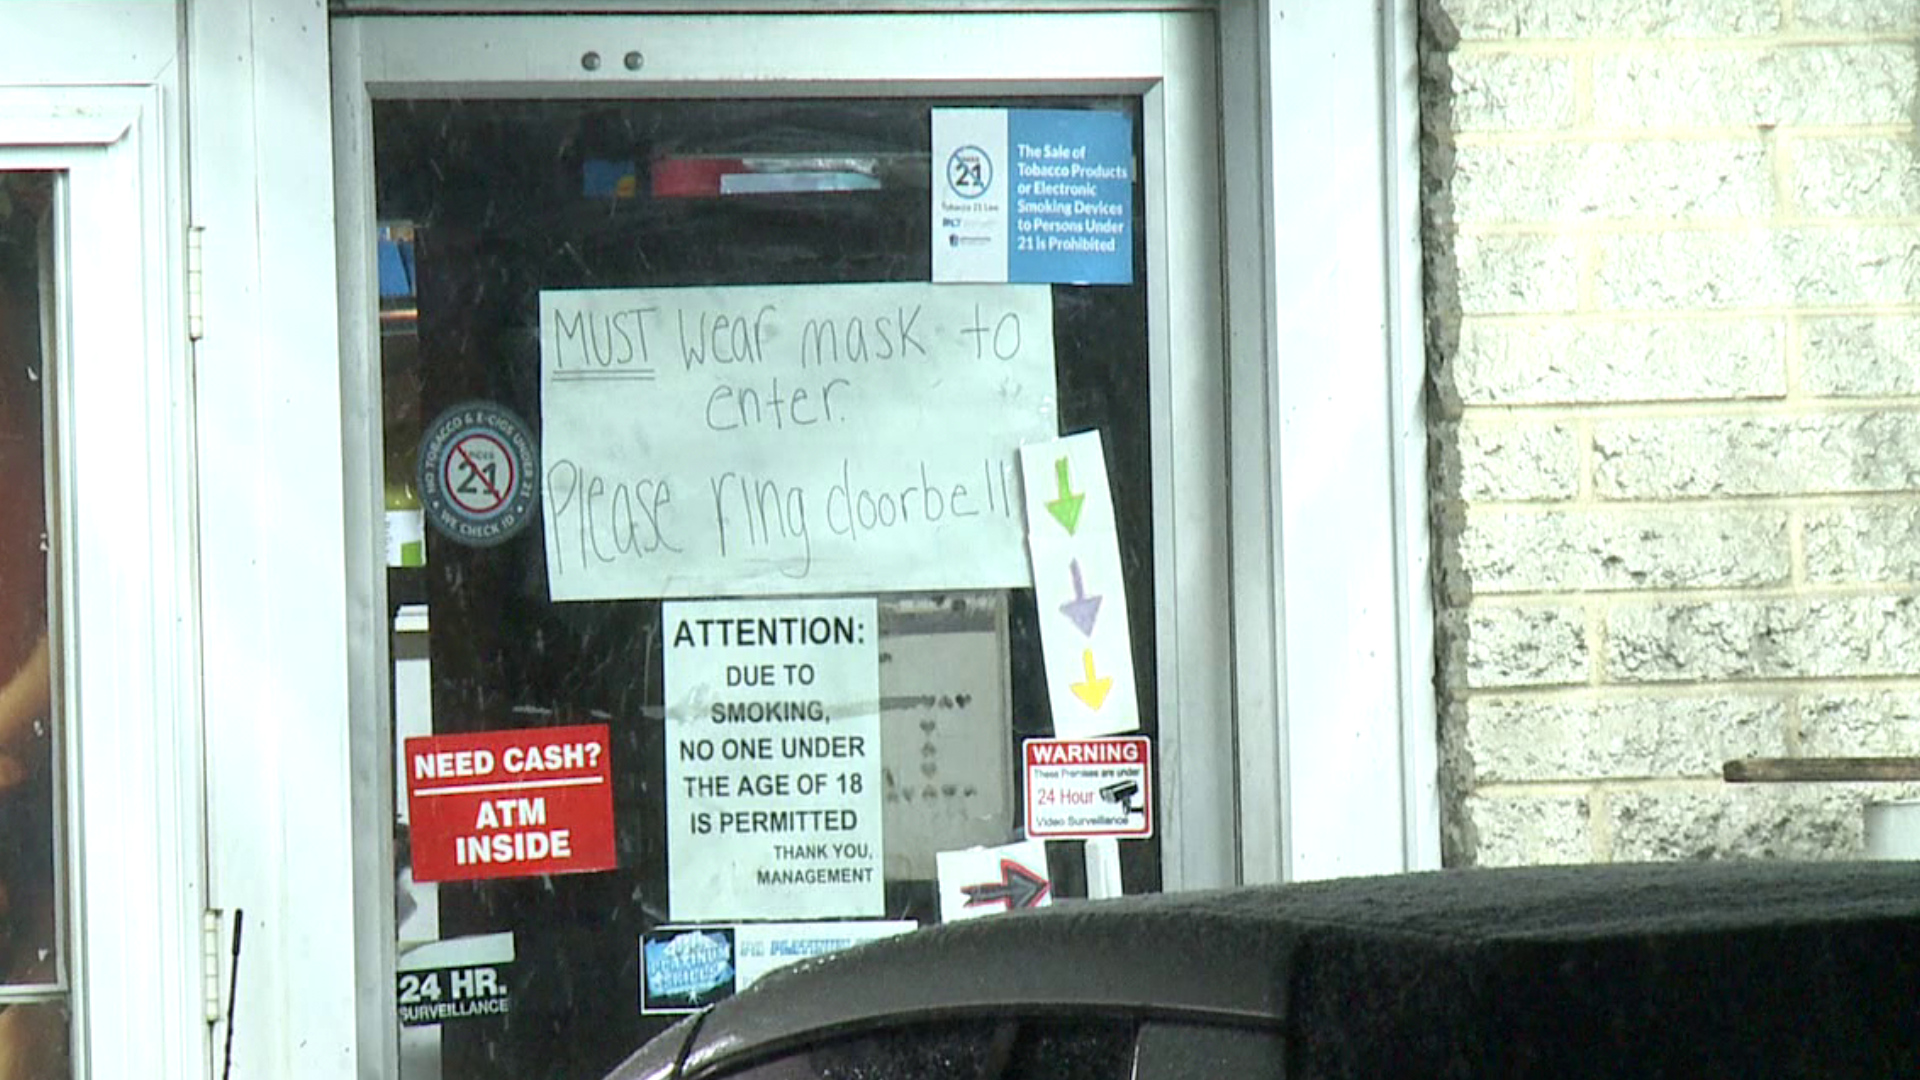 State police said employees and customers at both bars were not wearing masks.